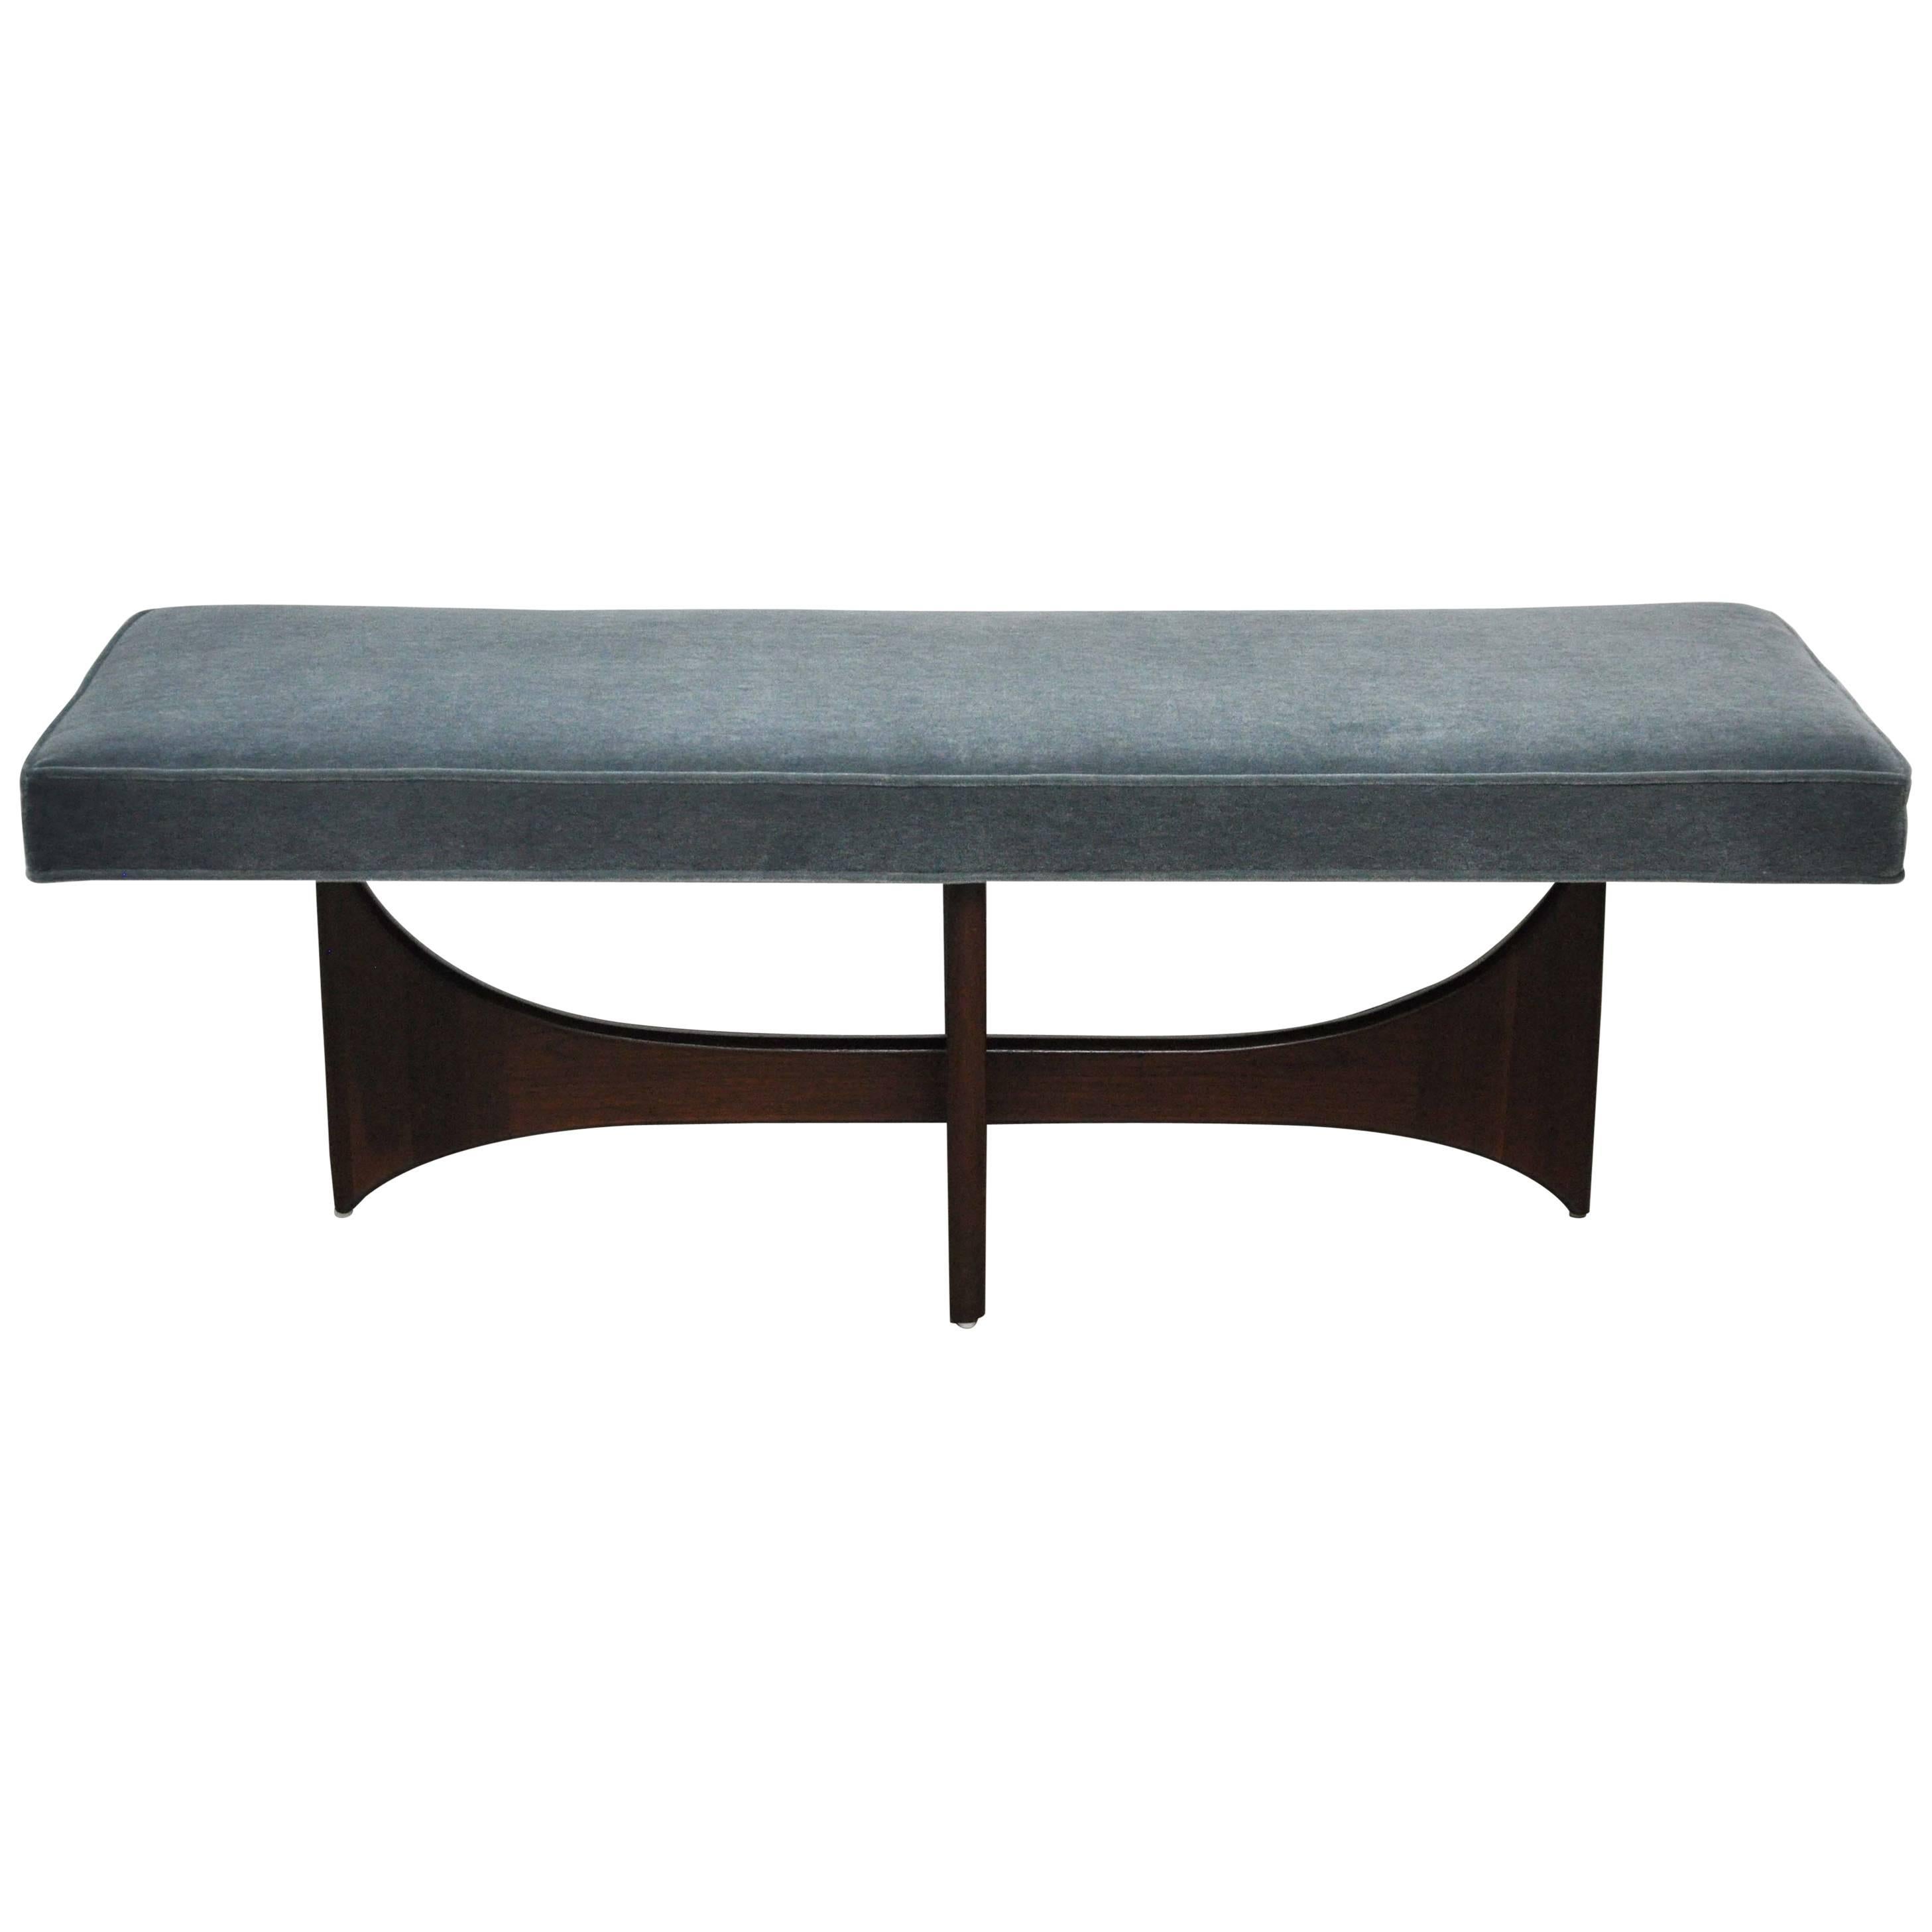 Sculptural walnut base by Adrian Pearsall. New bench top upholstered in blue mohair.

Pair available.